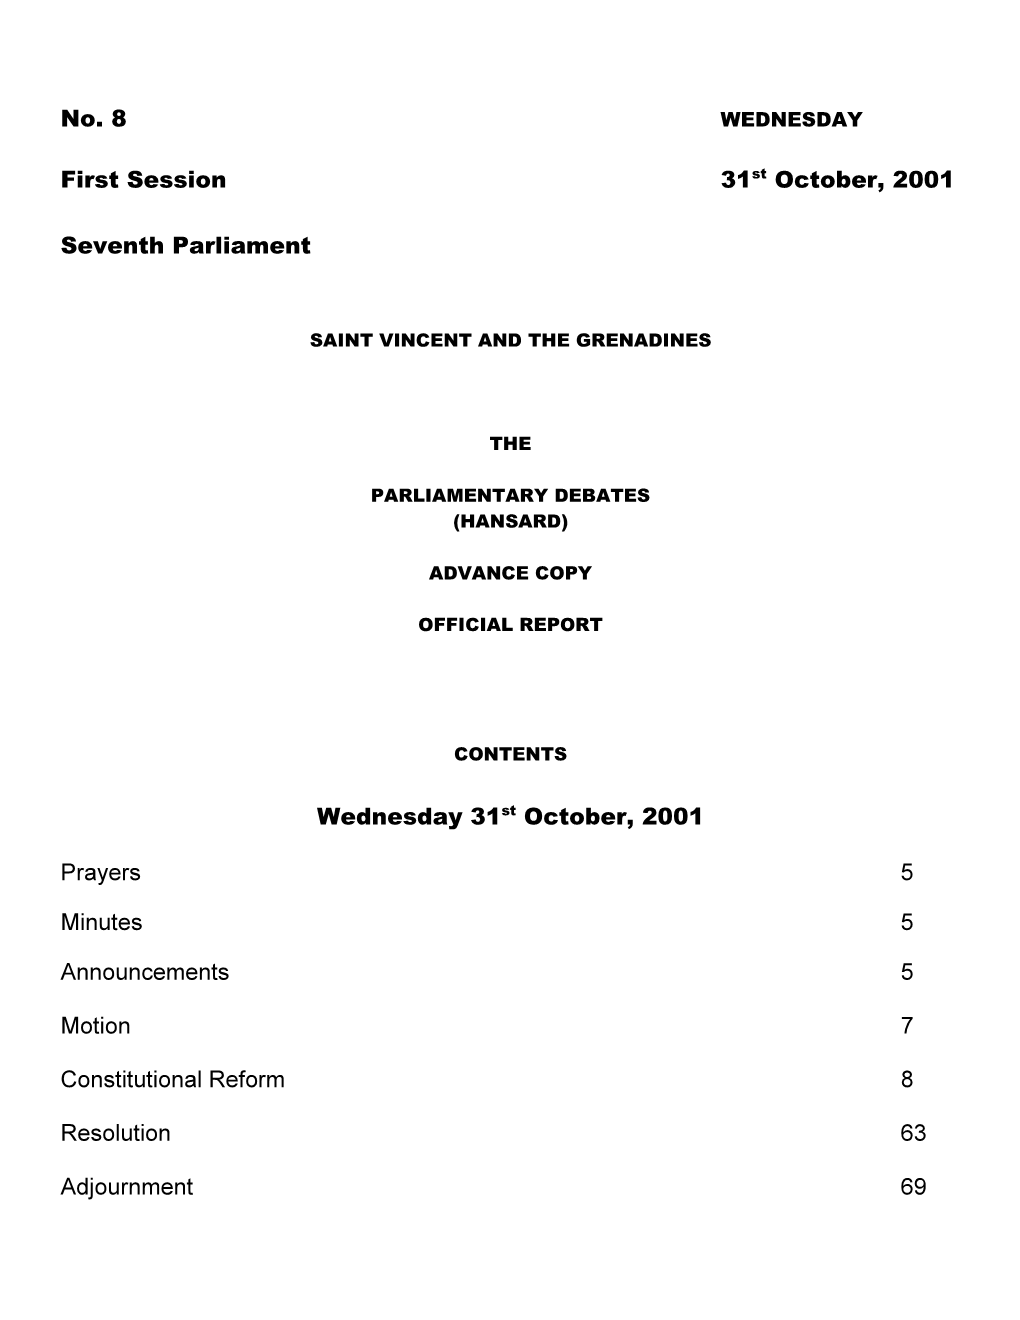 No. 8 First Session 31St October, 2001 Seventh Parliament Wednesday